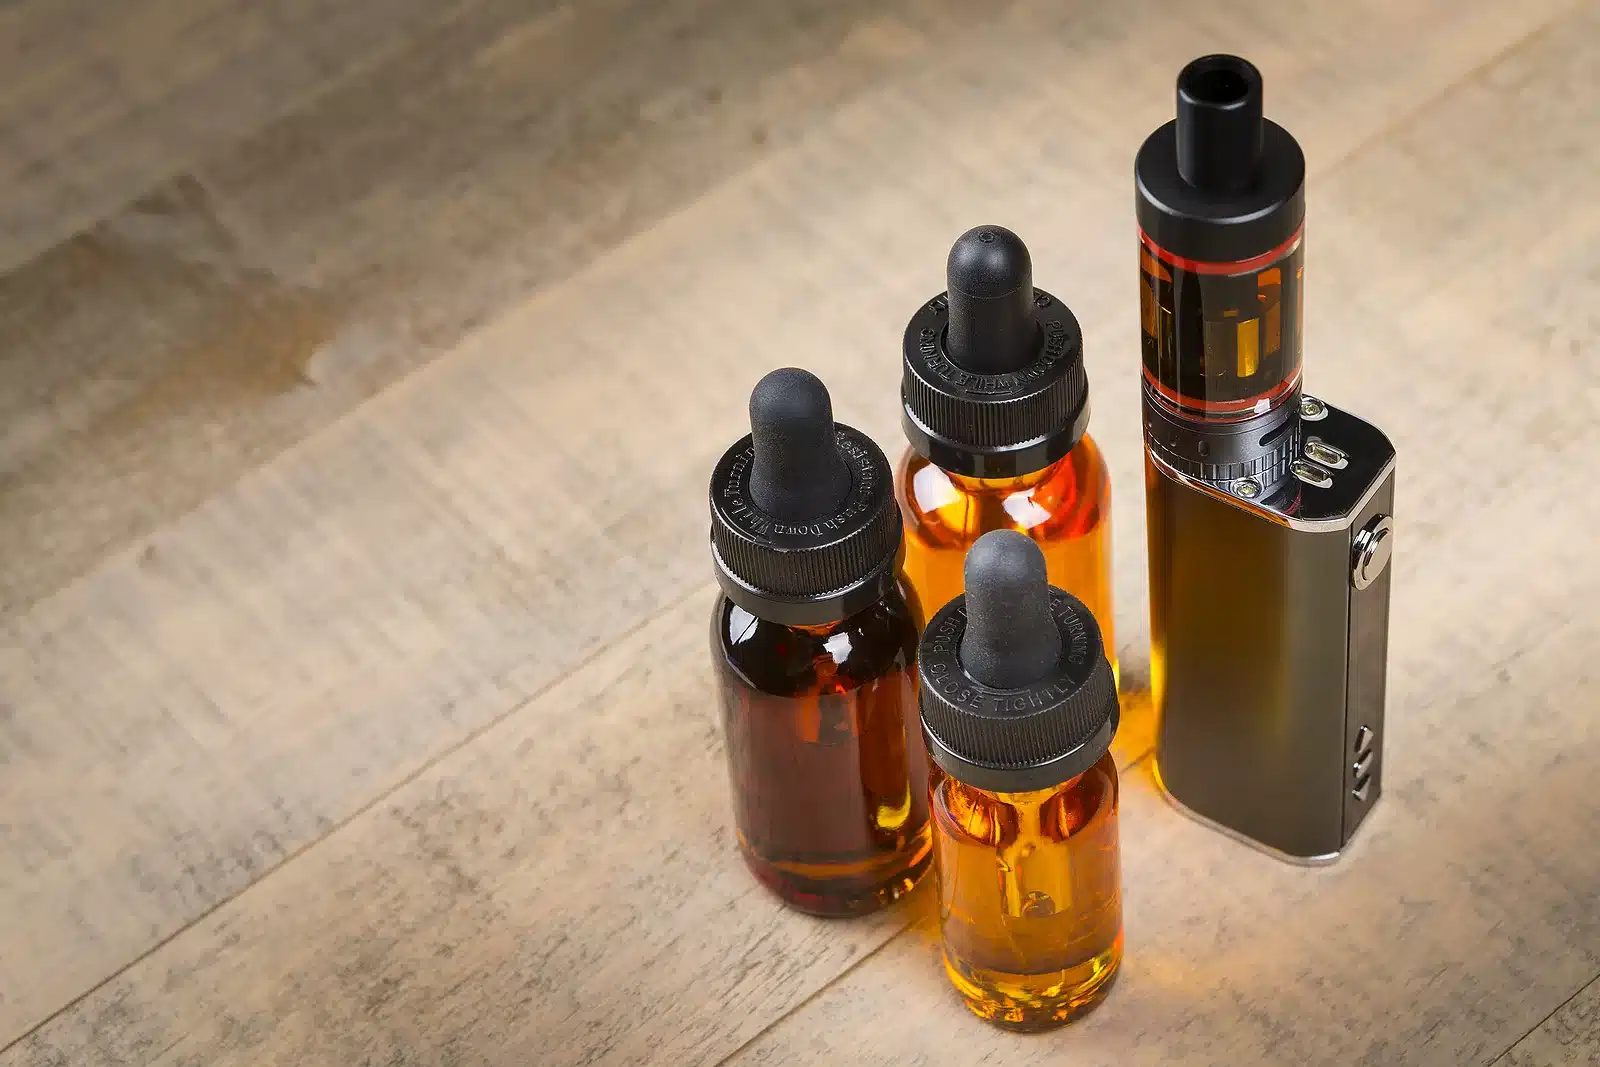 Vaping hardware and juice. Vape e-juice with mod and bottles with child proof lids over wood background.